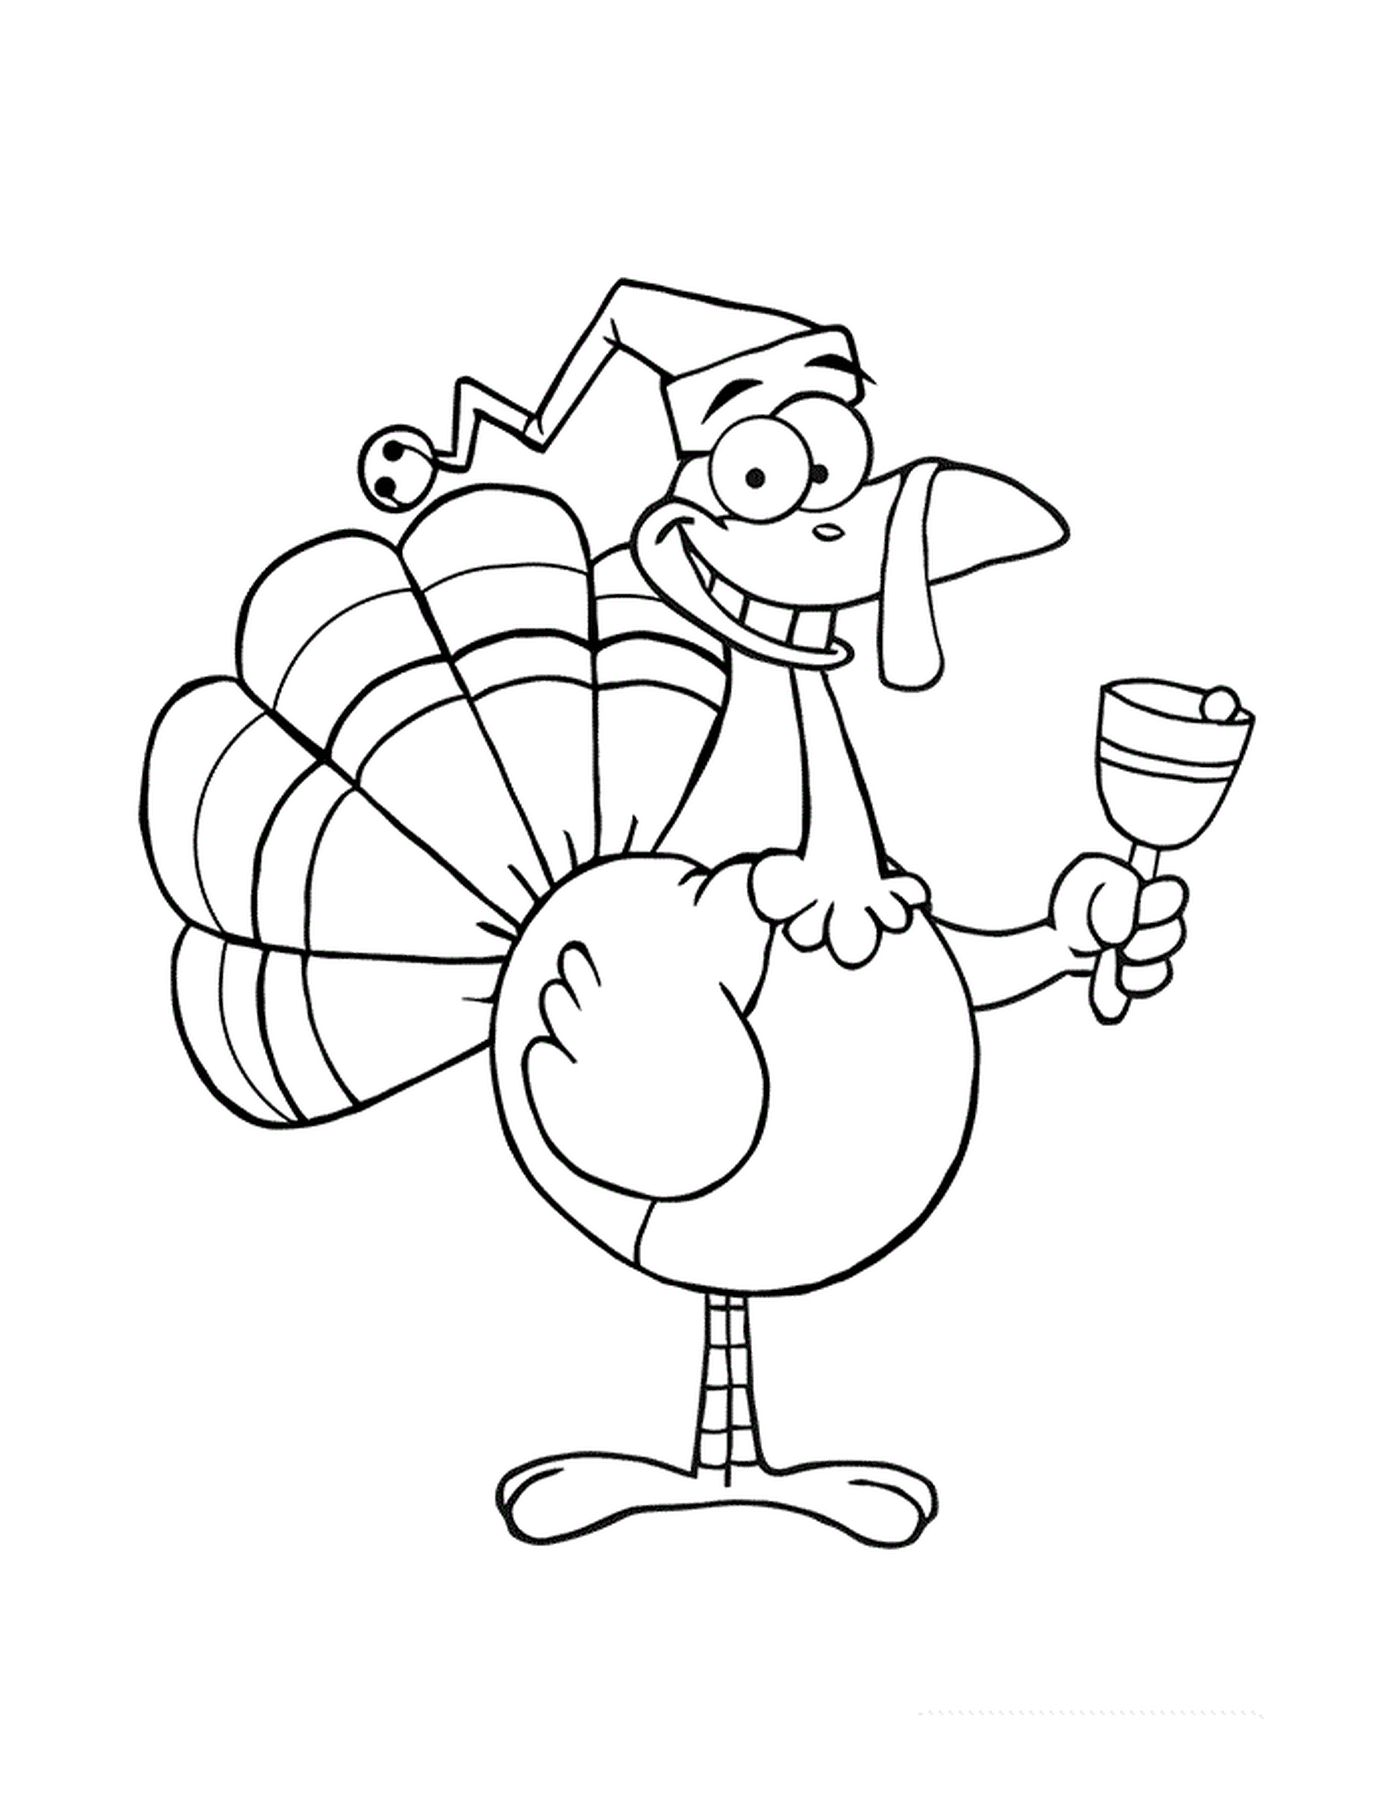  A cartoon turkey wearing a buffoon hat and holding a wine glass 